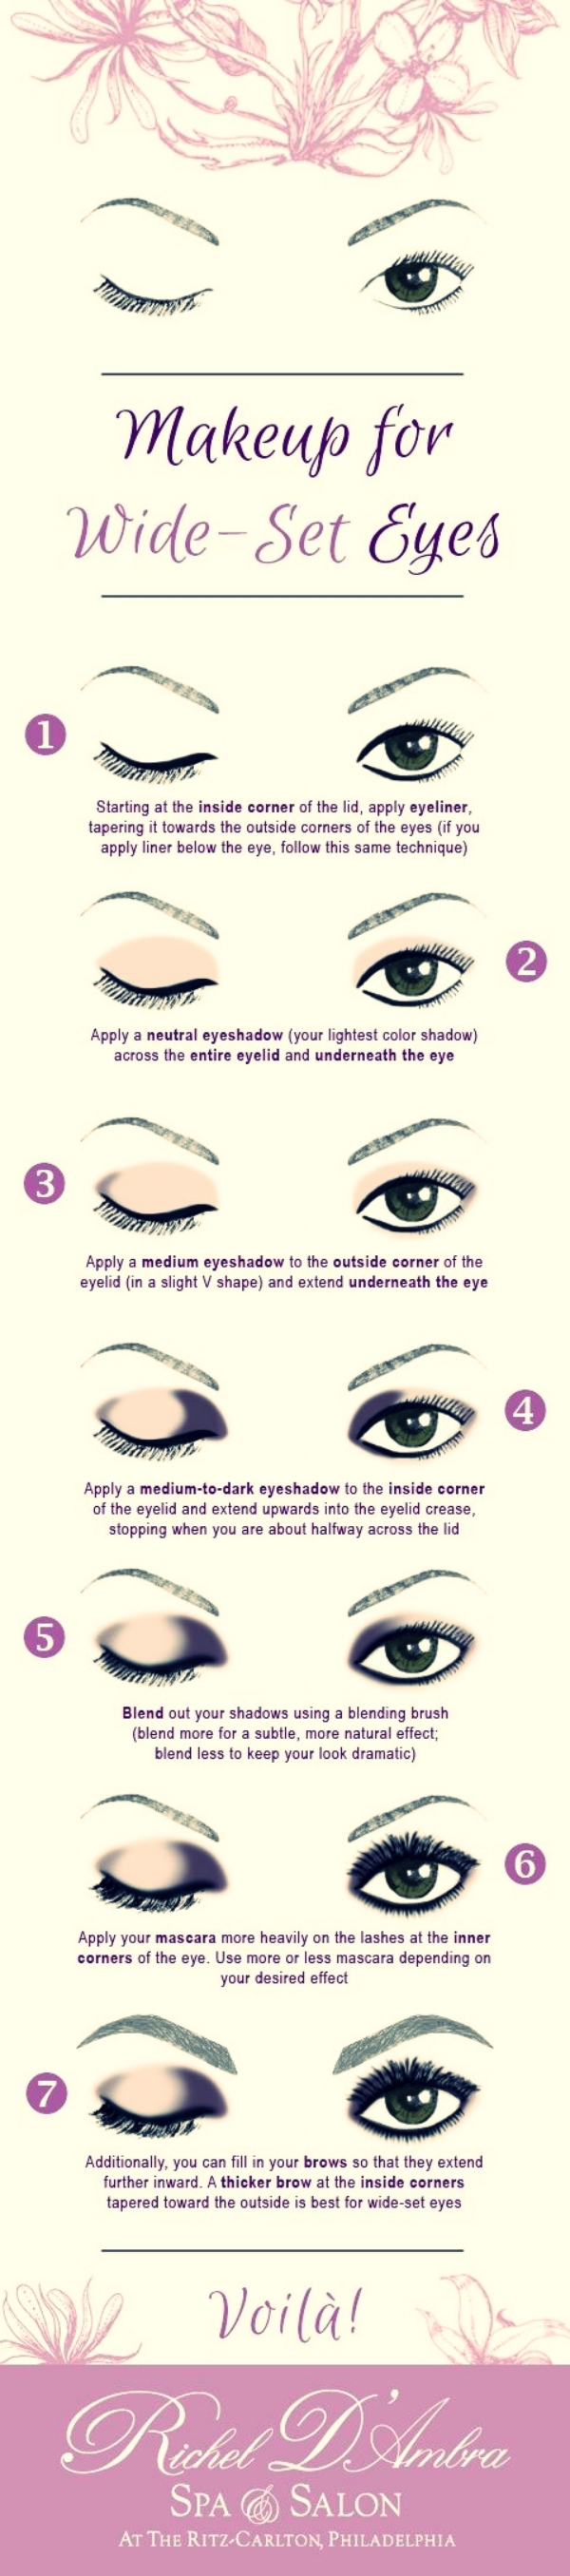 Makeup for Different Types of Eye Shapes